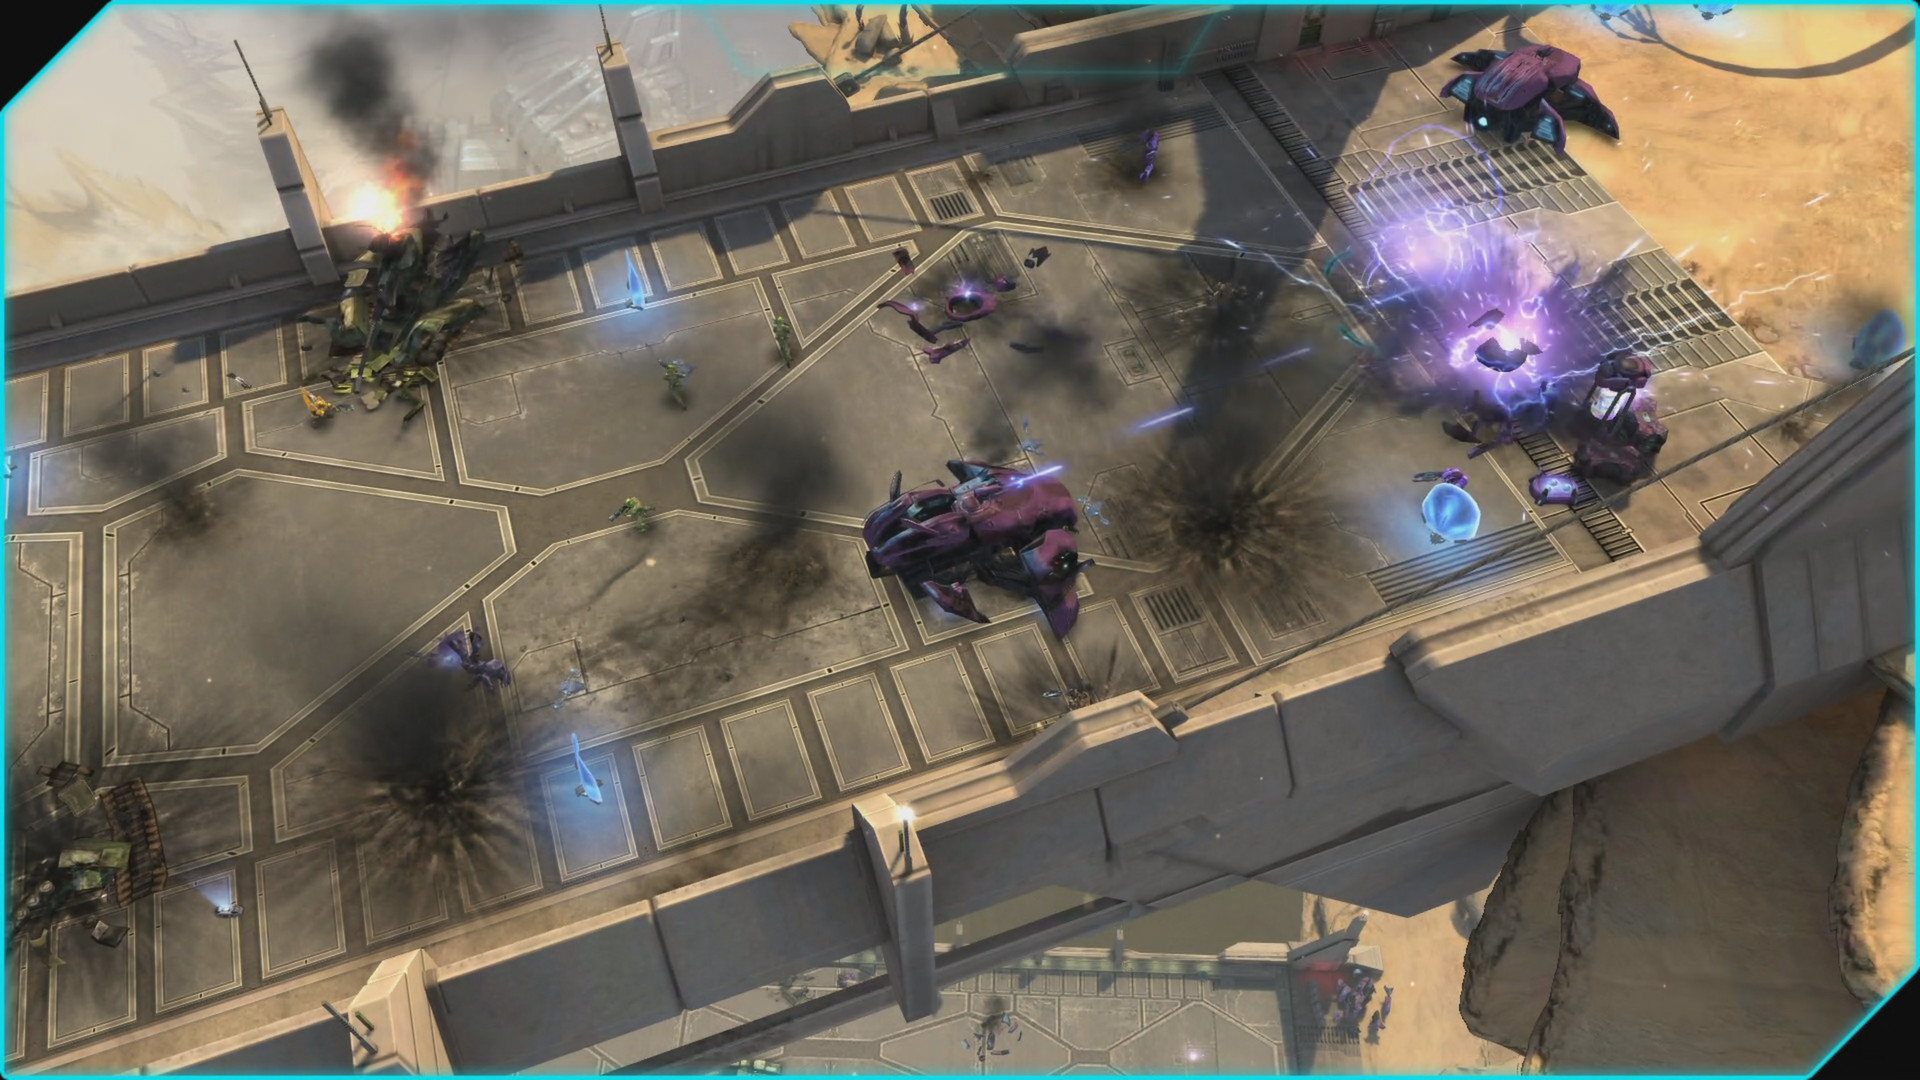 for android instal Halo: Spartan Assault Lite